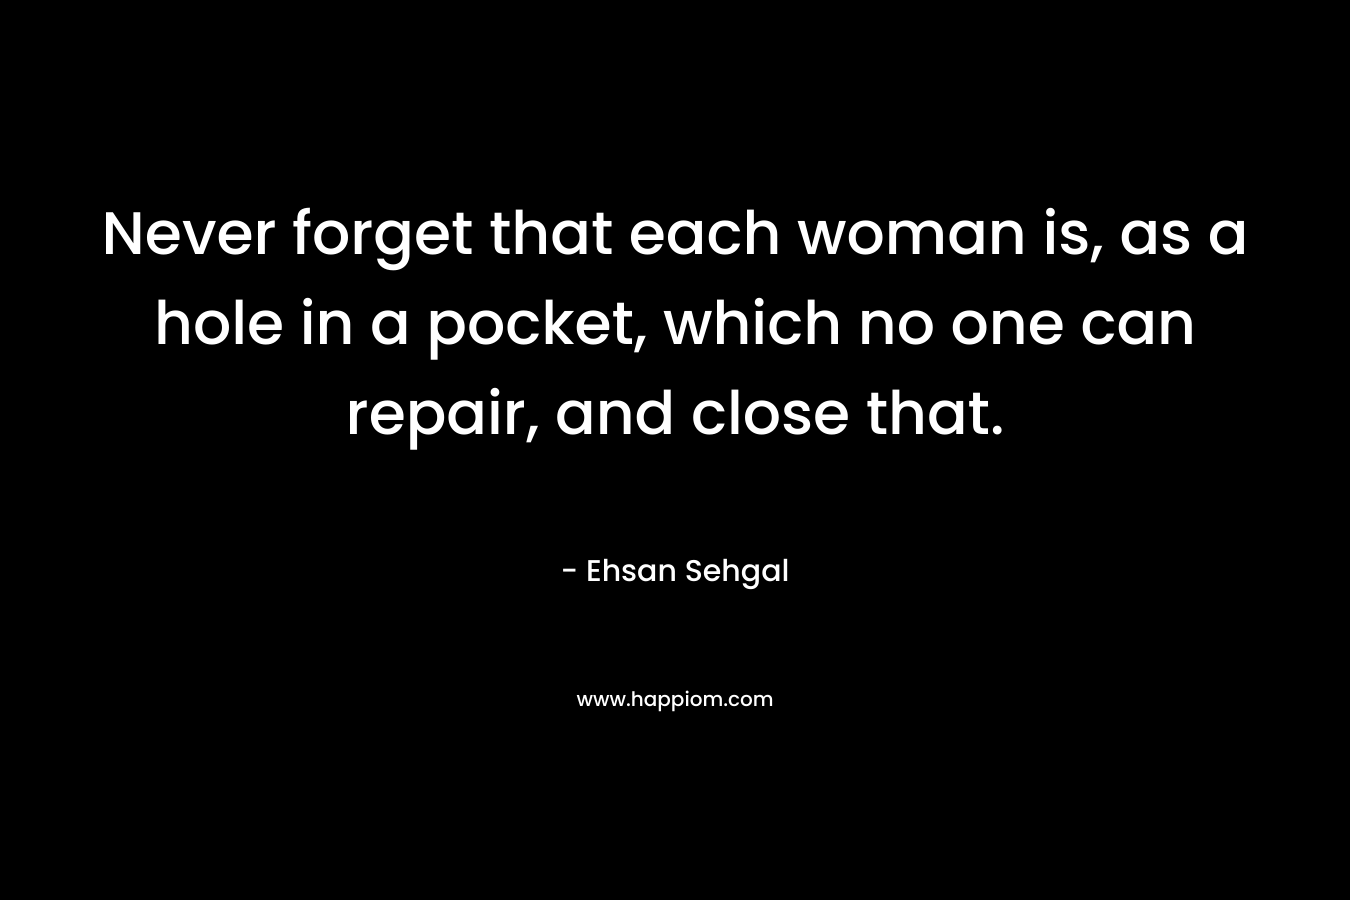 Never forget that each woman is, as a hole in a pocket, which no one can repair, and close that. – Ehsan Sehgal